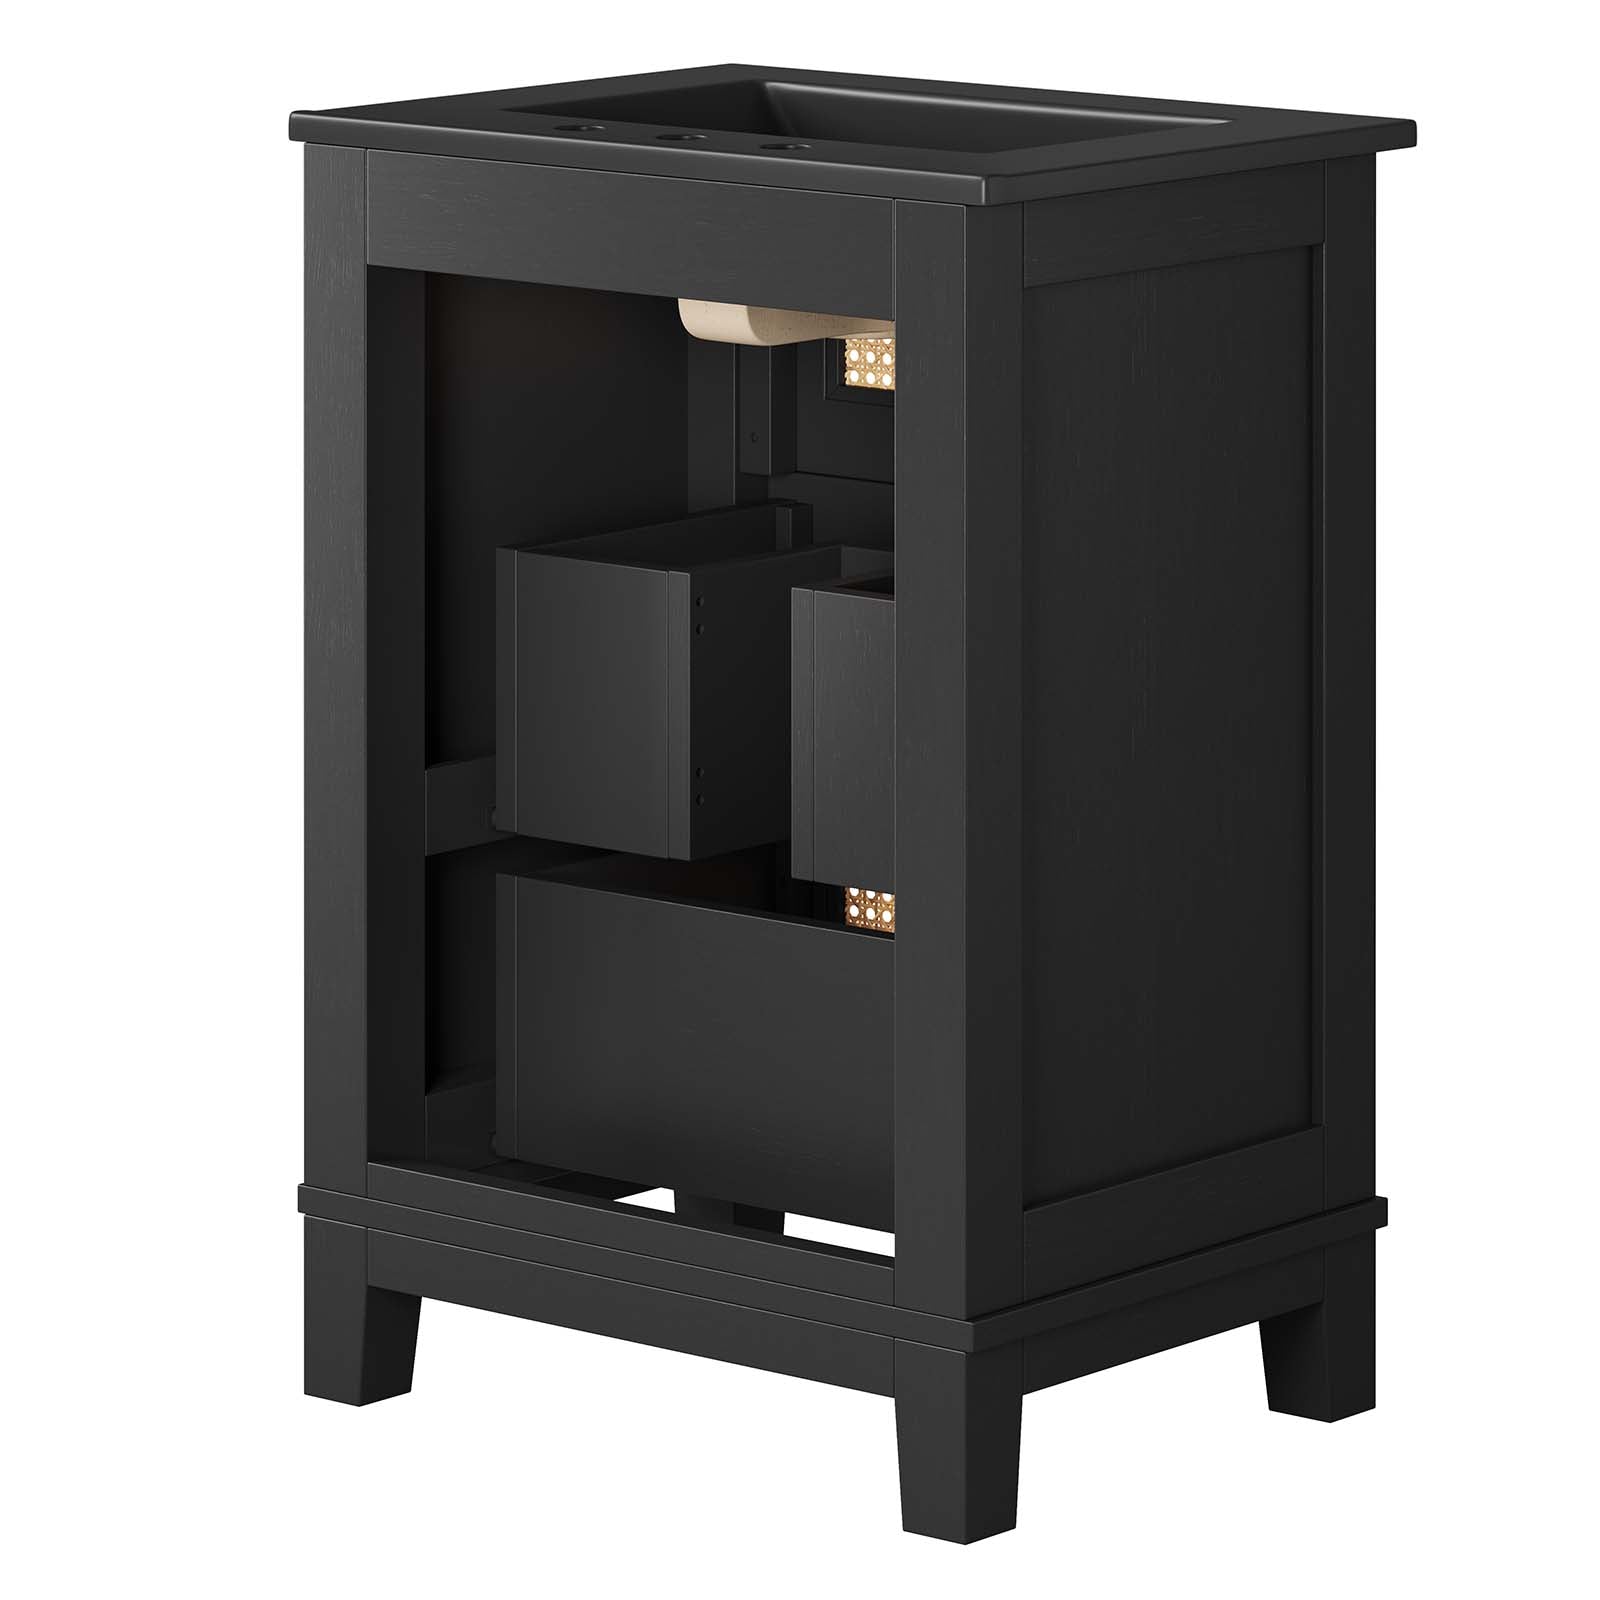 Dixie 24” Solid Wood Bathroom Vanity Cabinet By Modway - EEI-6724 | Bathroom Accessories | Modway - 5